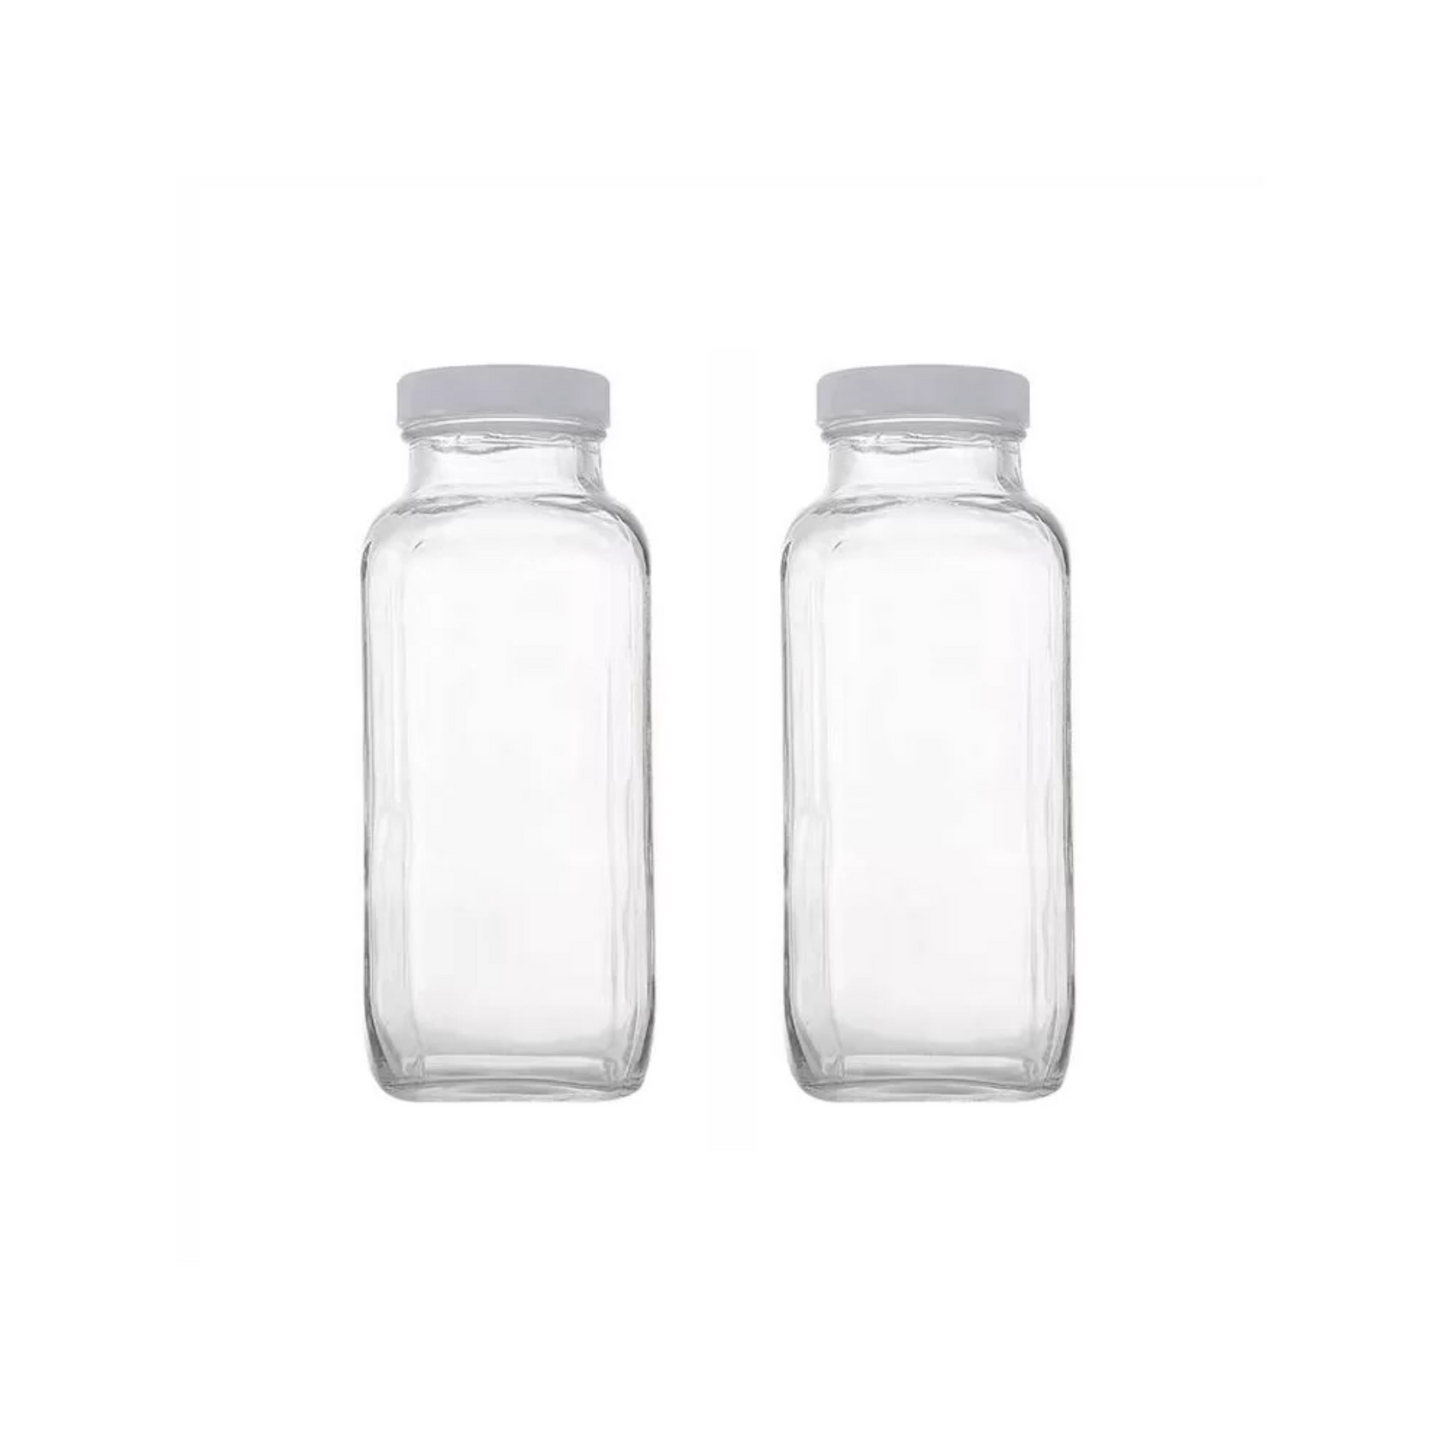 French Square Glass Jars With Lid 12 Oz